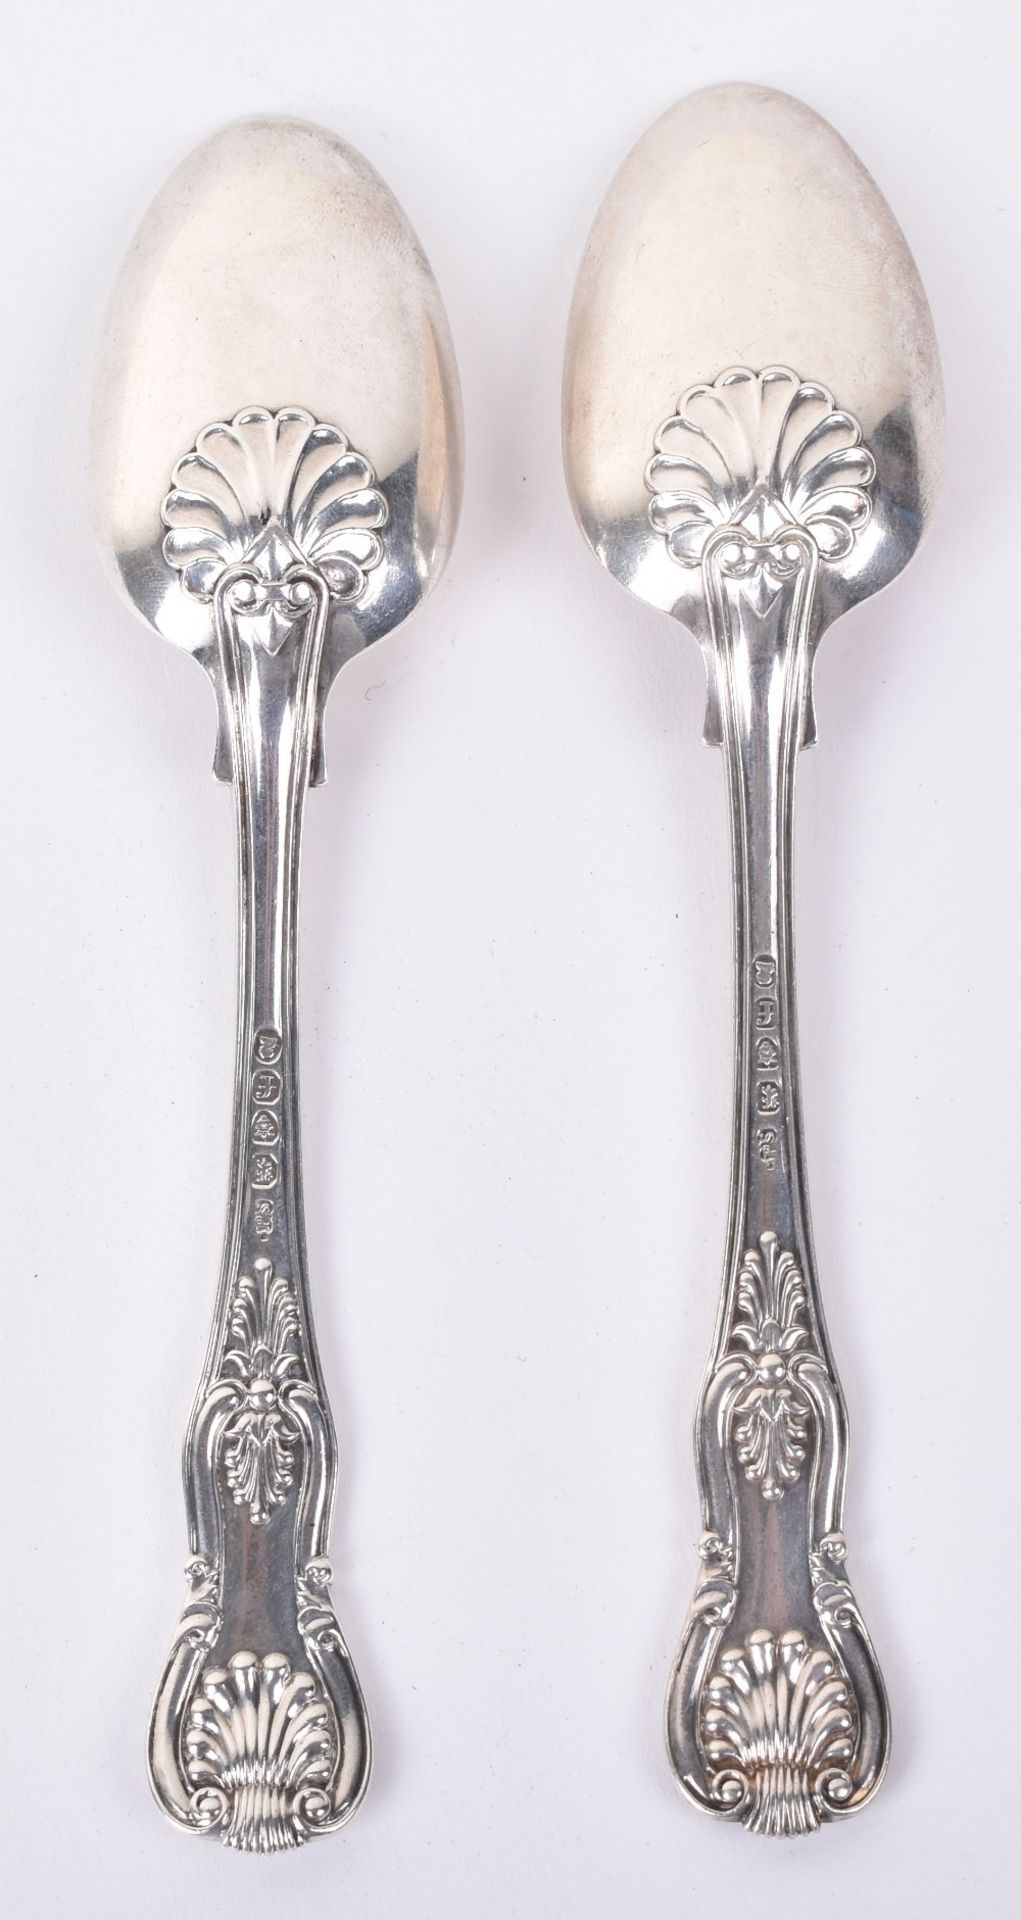 A pair of George IV fiddle and shell pattern silver spoons, by Paul Storr, London, 1821 - Image 2 of 7